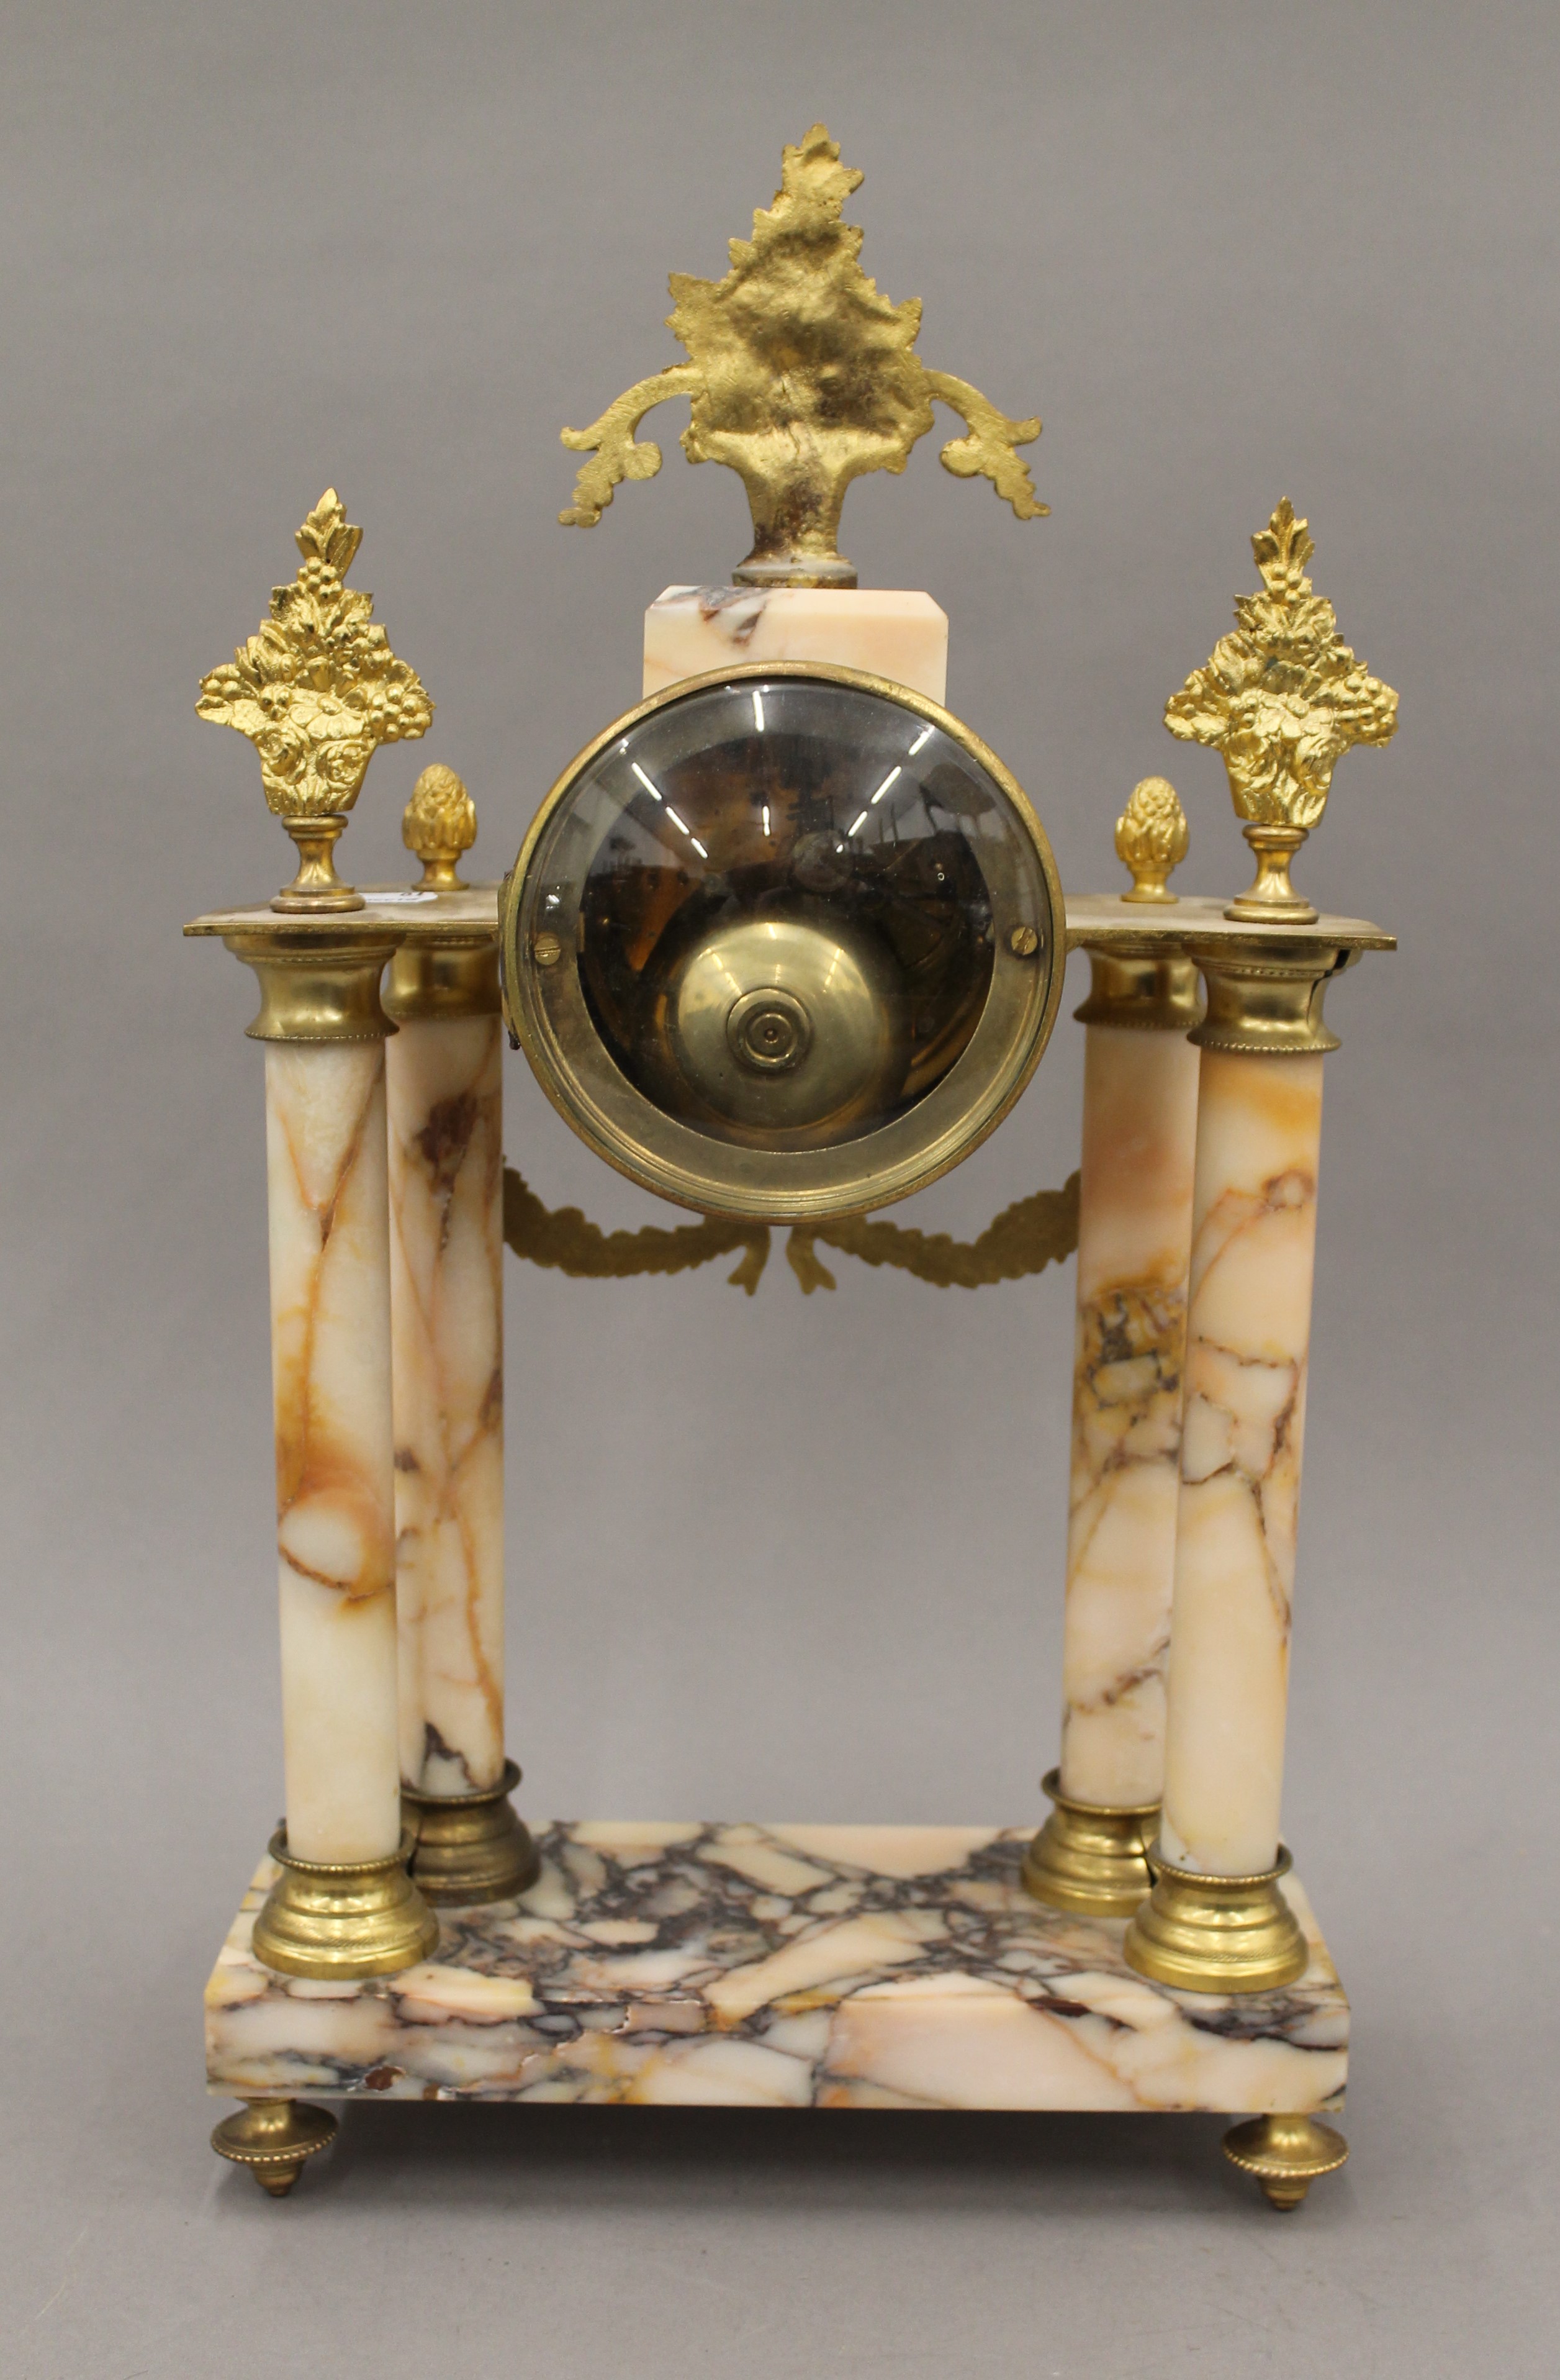 A marble and ormolu clock garniture with pendulum and key, with enamel dial and striking movement. - Image 4 of 14